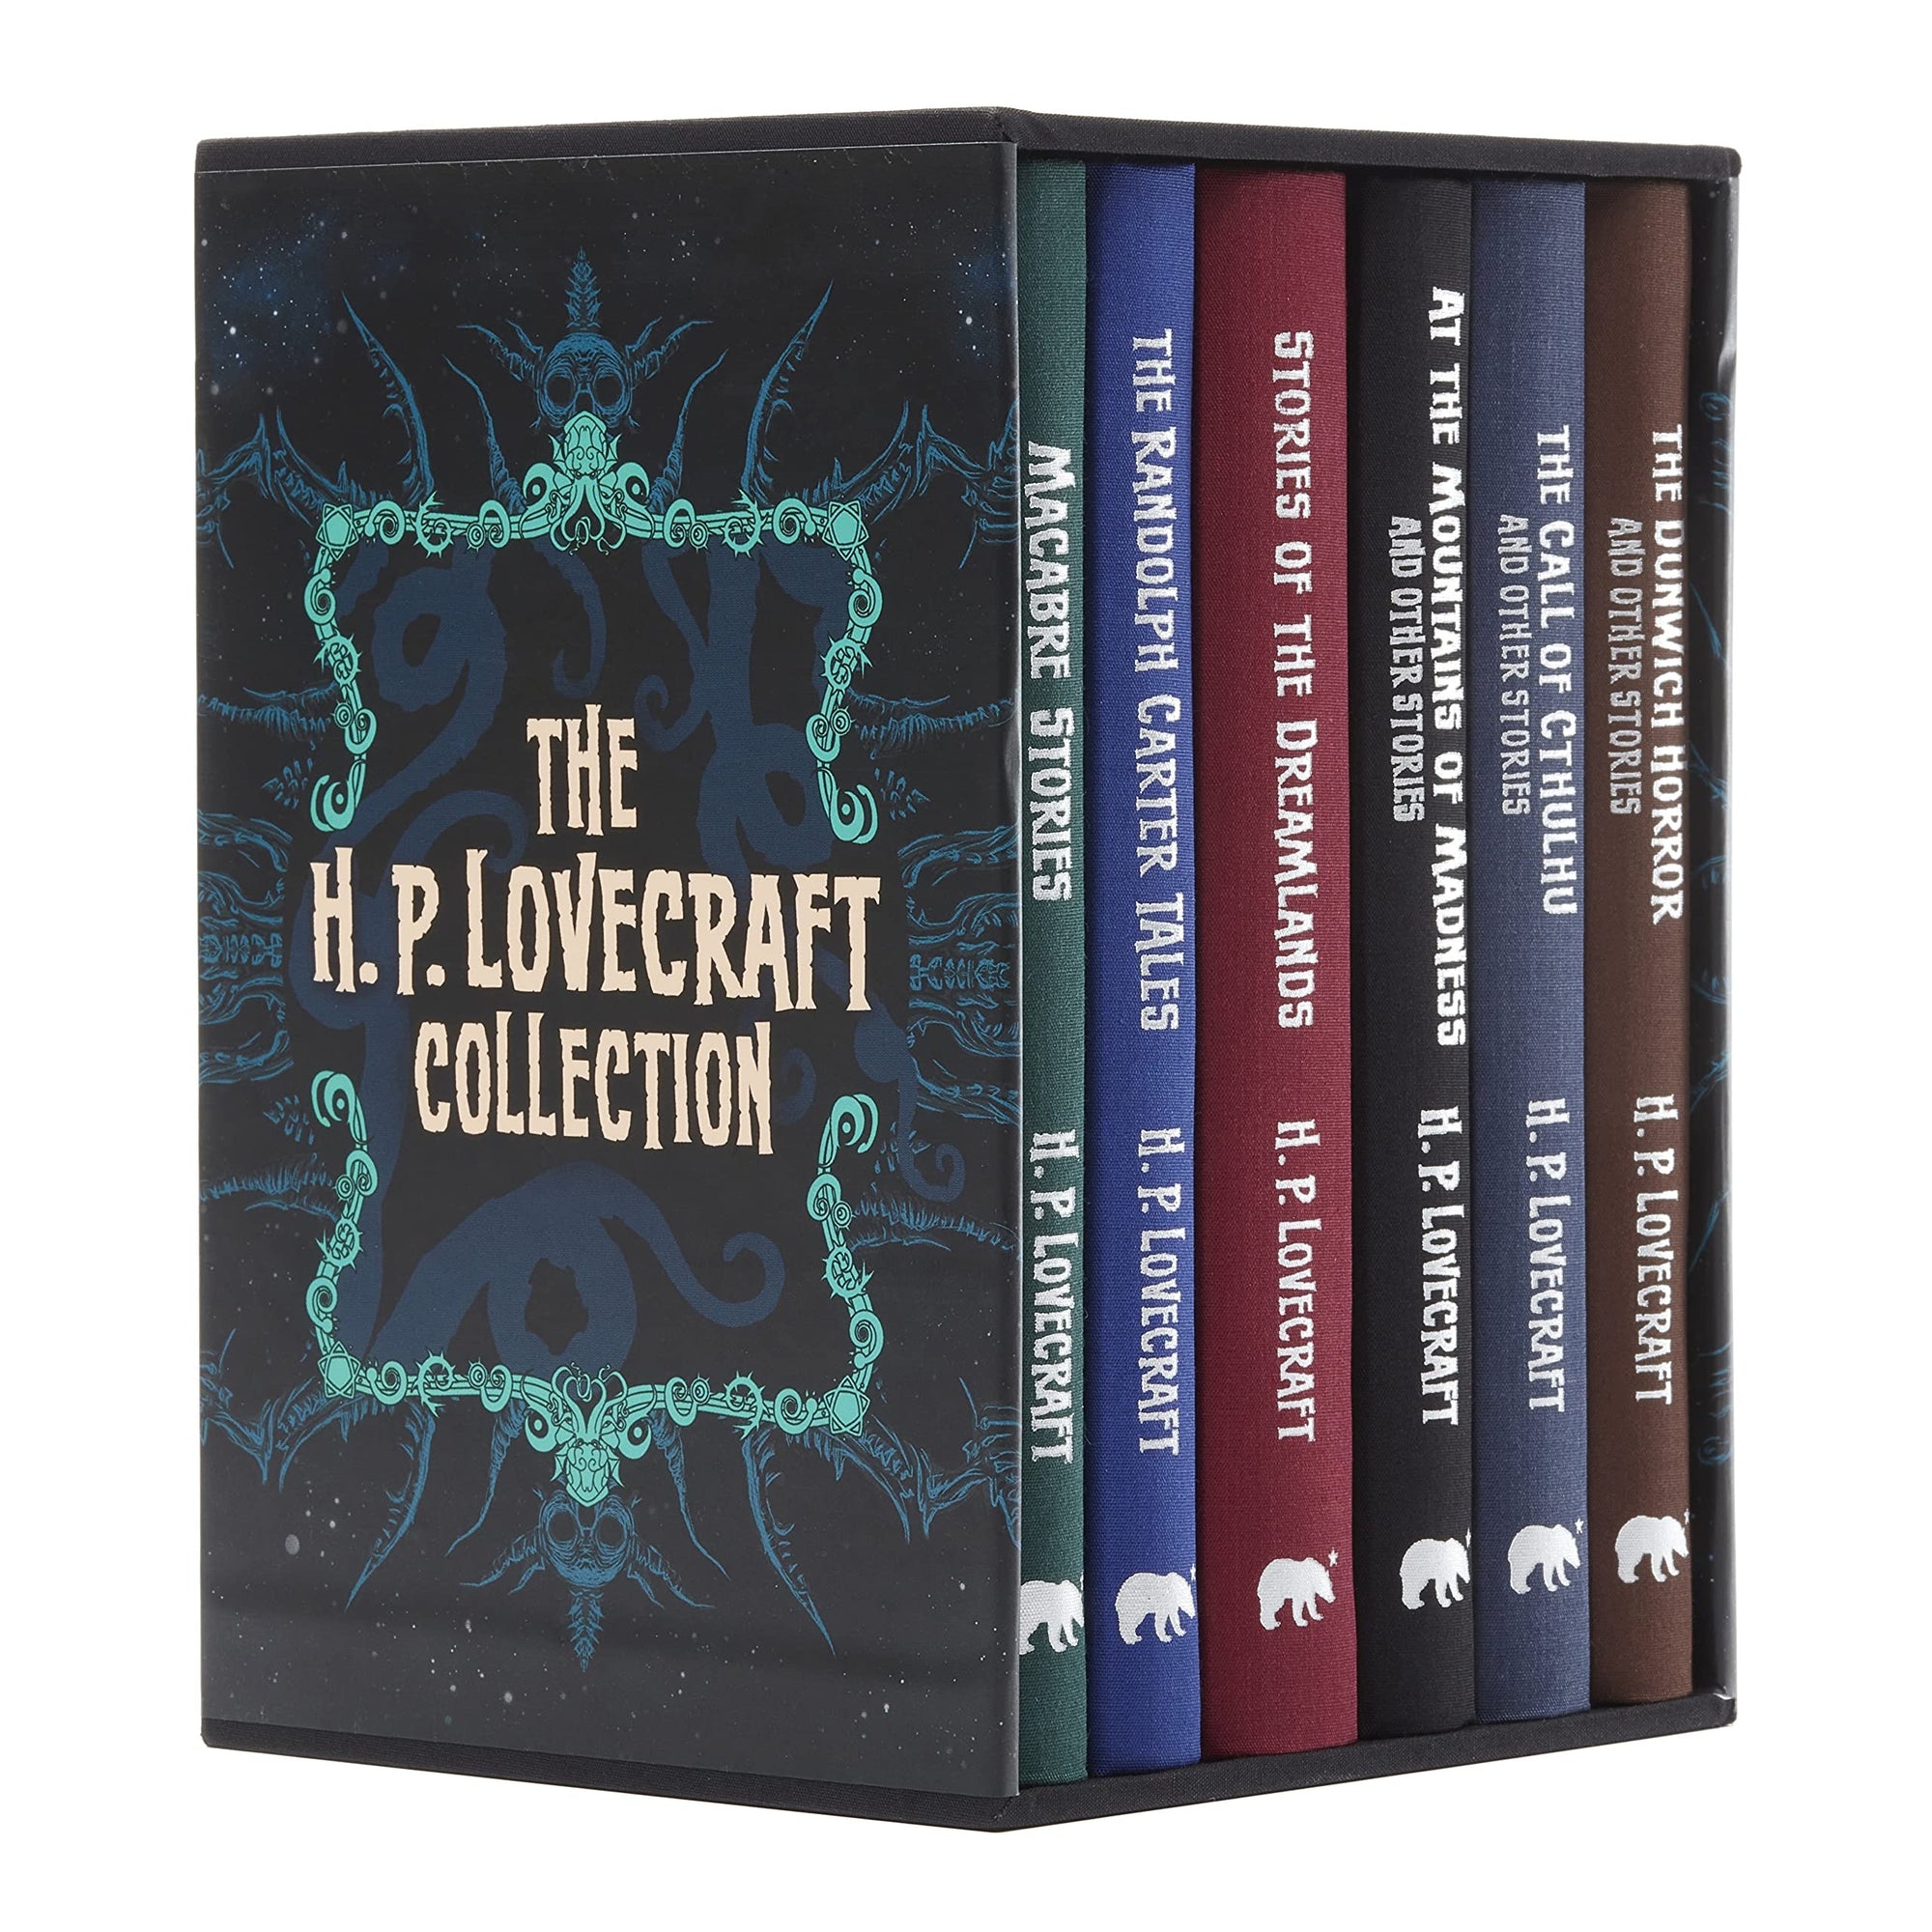 The H.P. Lovecraft Collection: Deluxe 6-Book Hardcover Box Set (PREORDER)